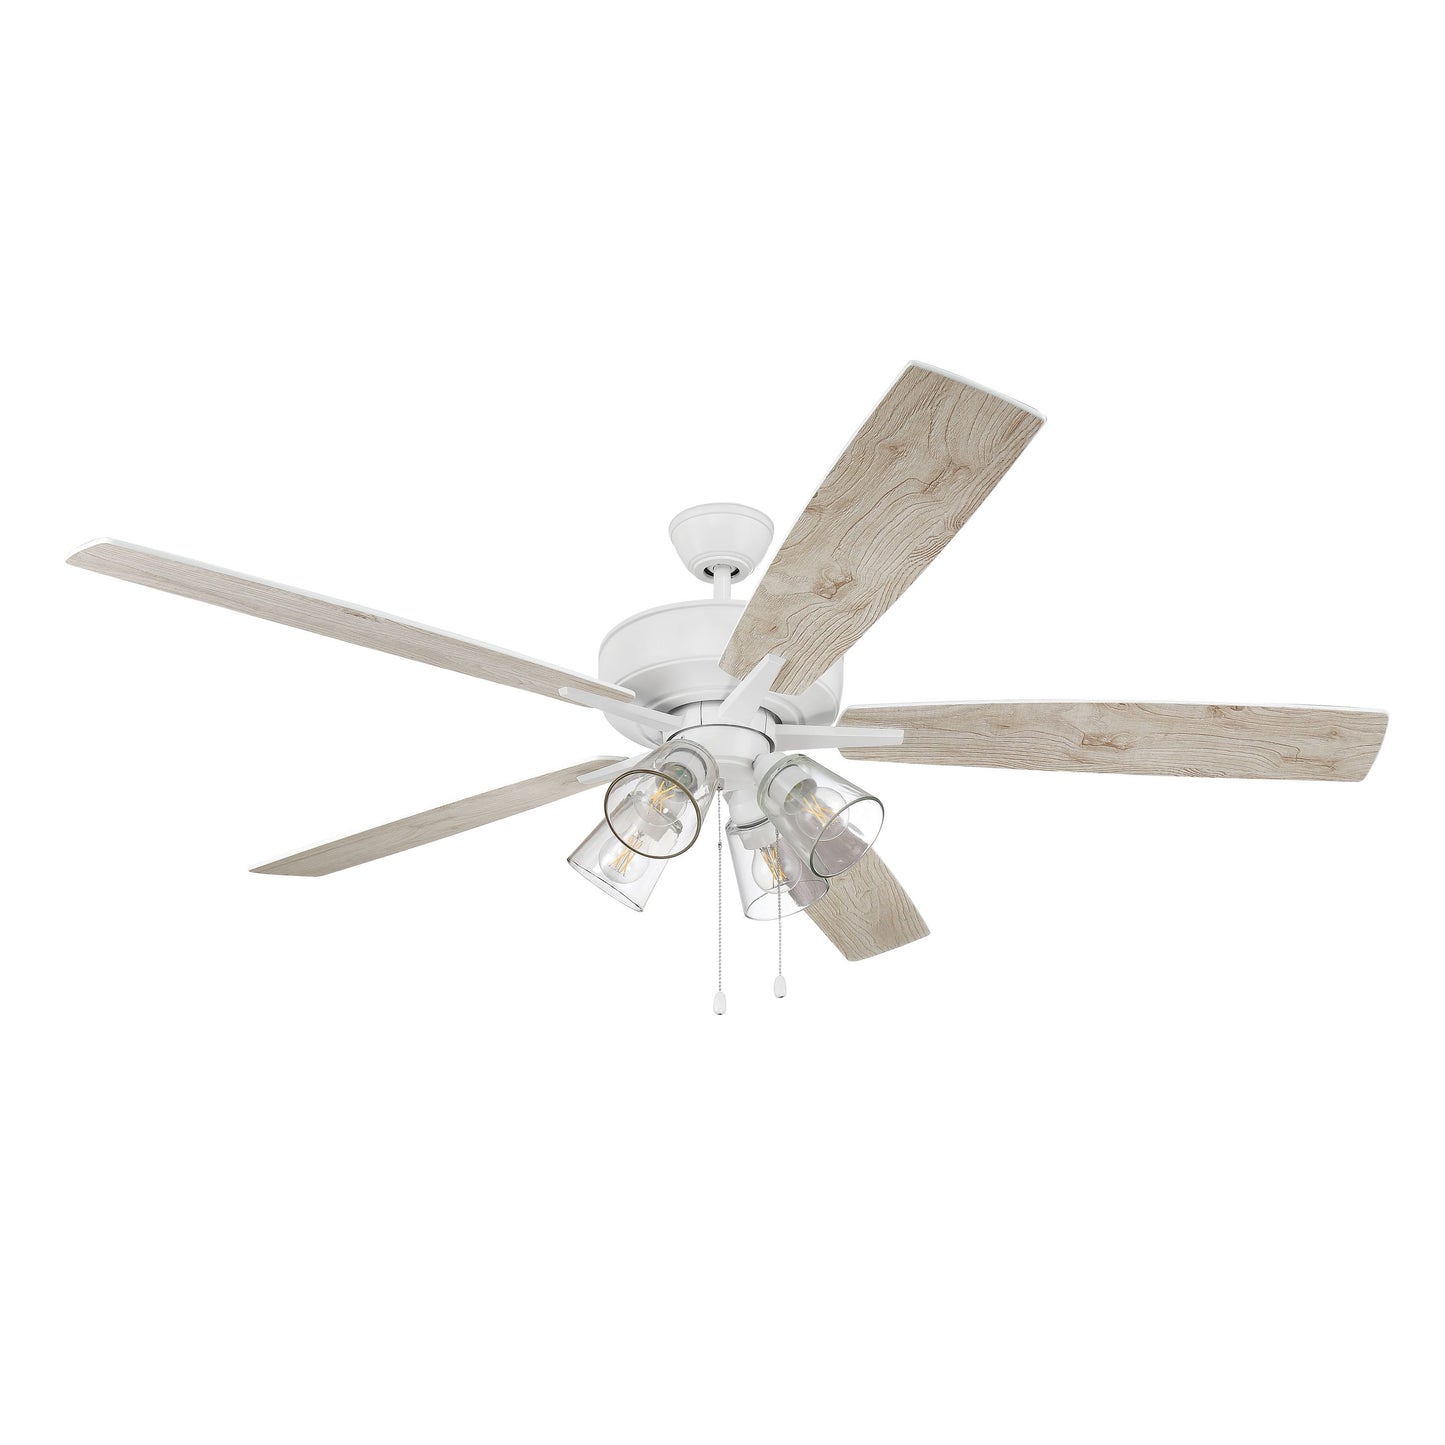 S104W5-60WWOK - Super Pro 104 60" 5 Blade Ceiling Fan with Light Kit - Pull Chain - White